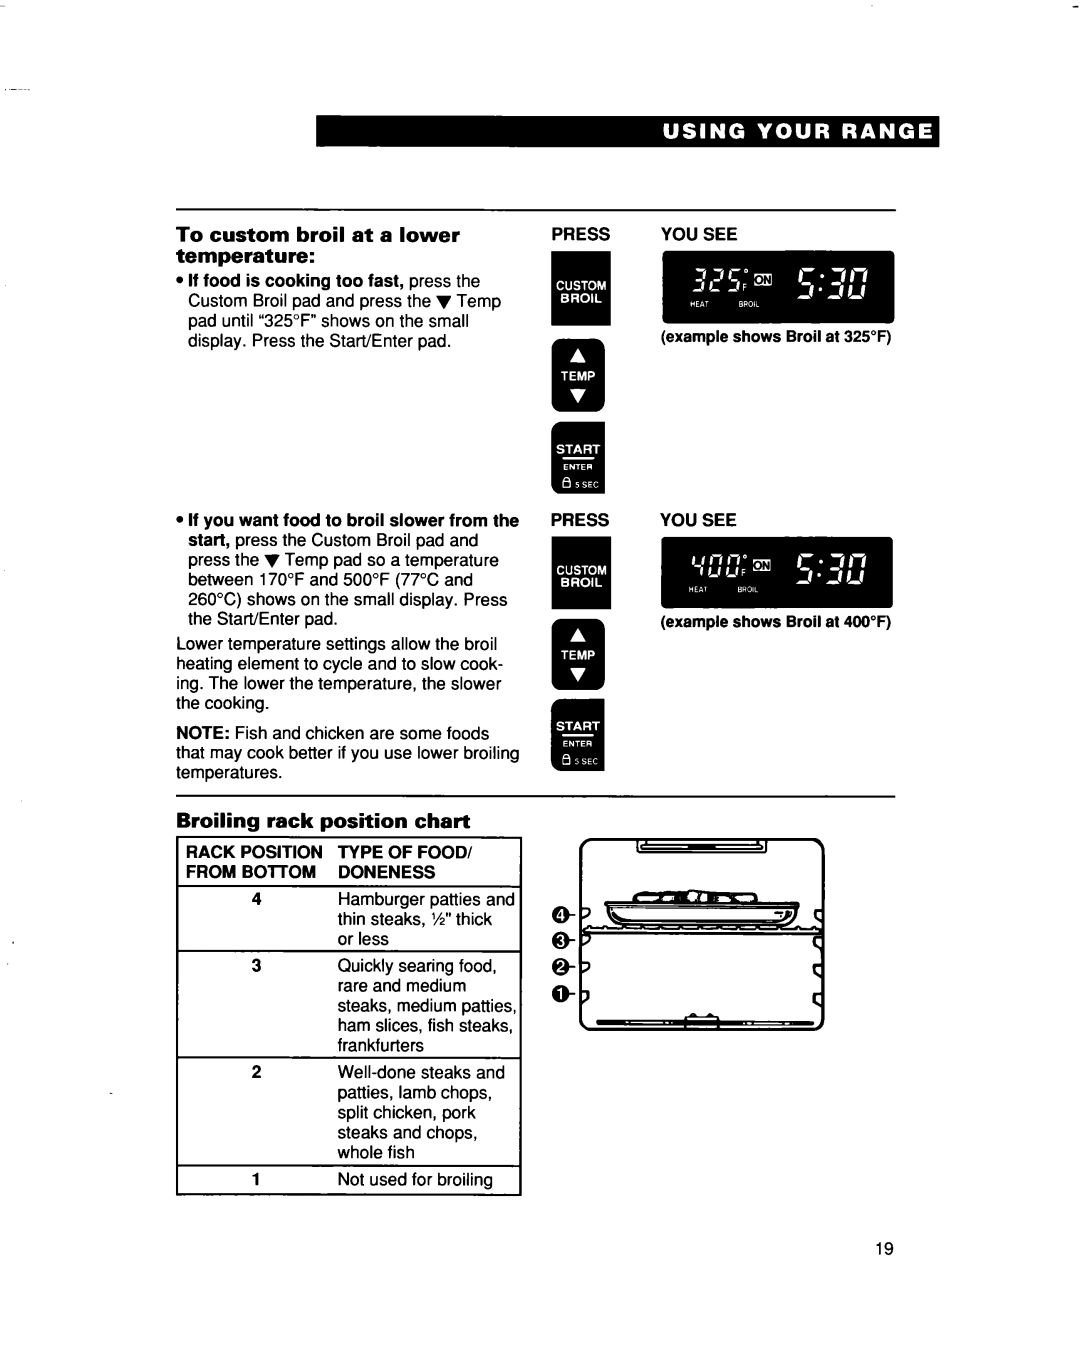 Whirlpool RF315PXD manual To custom broil at a lower temperature, Broiling rack position chart, example shows Broil at 325F 